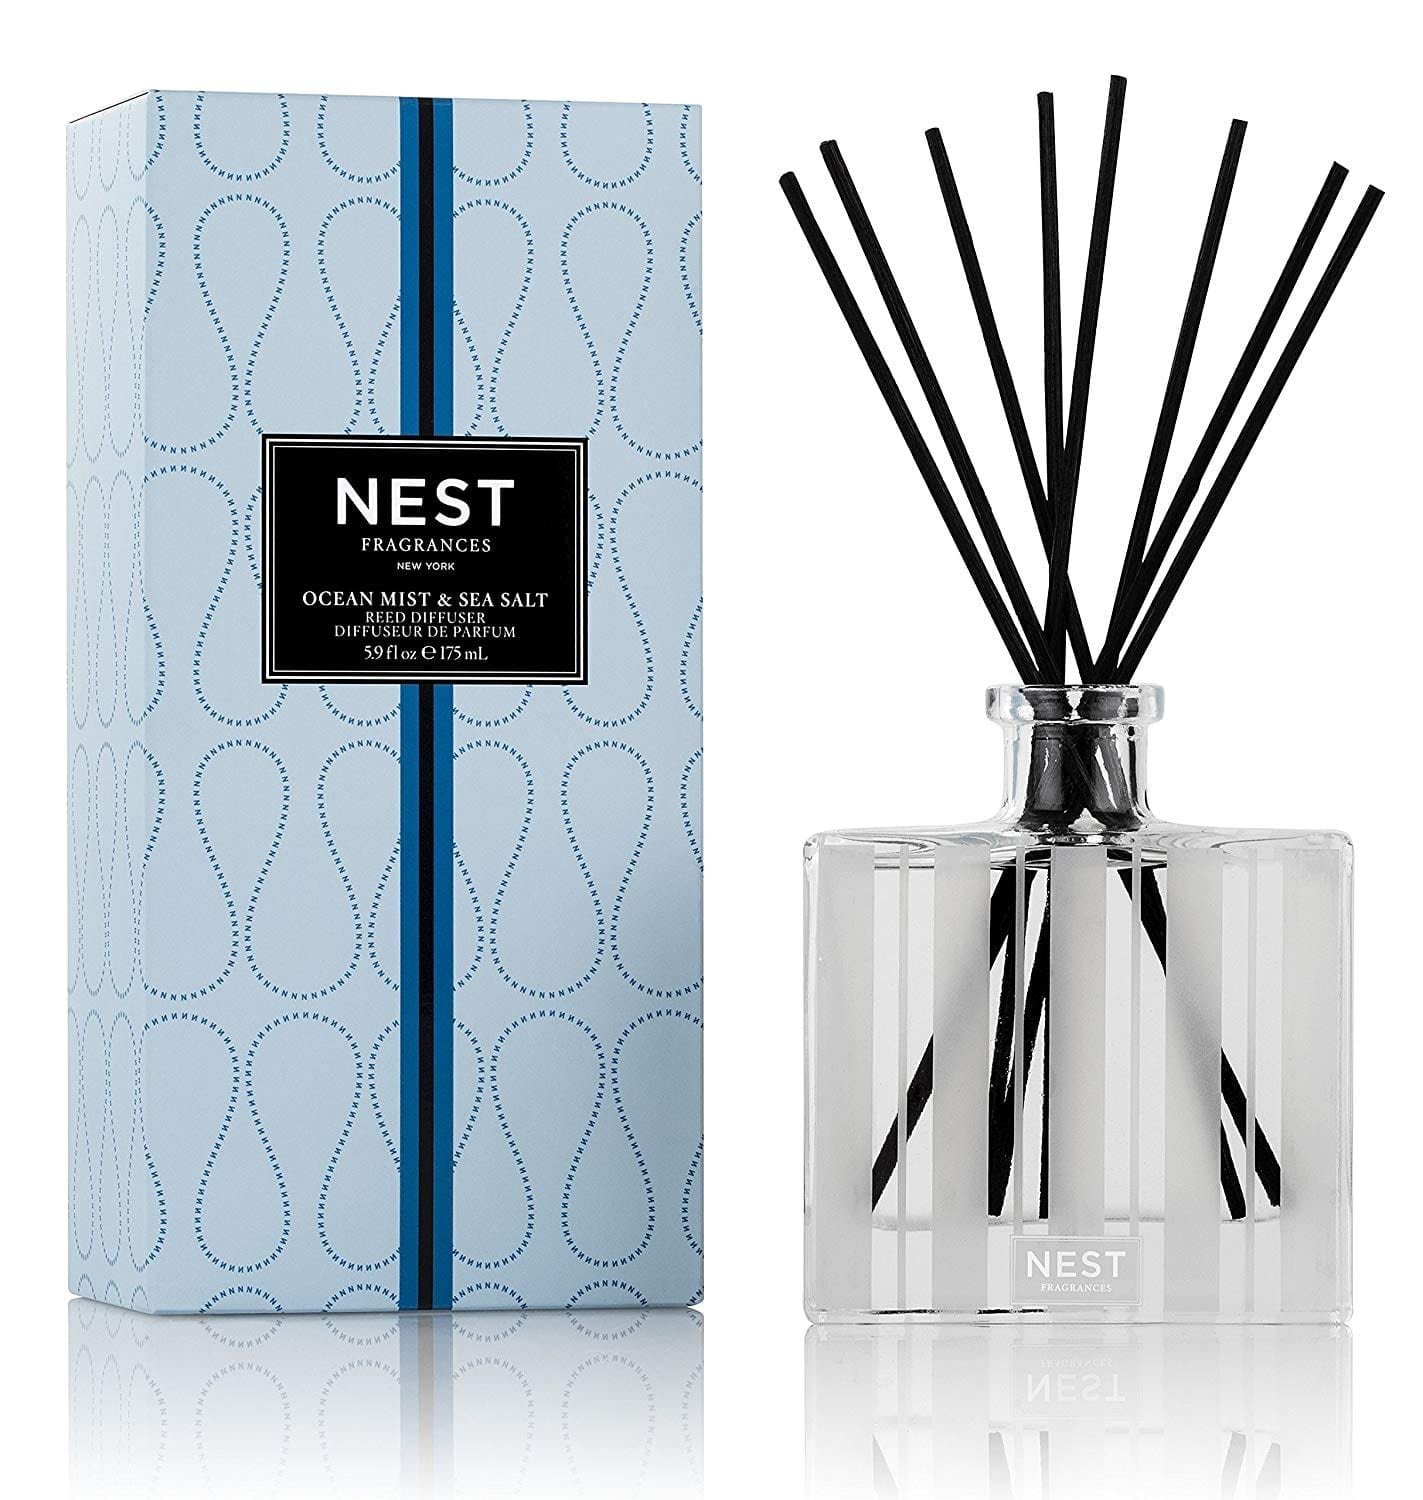 office stress relief gadget - reed diffuser